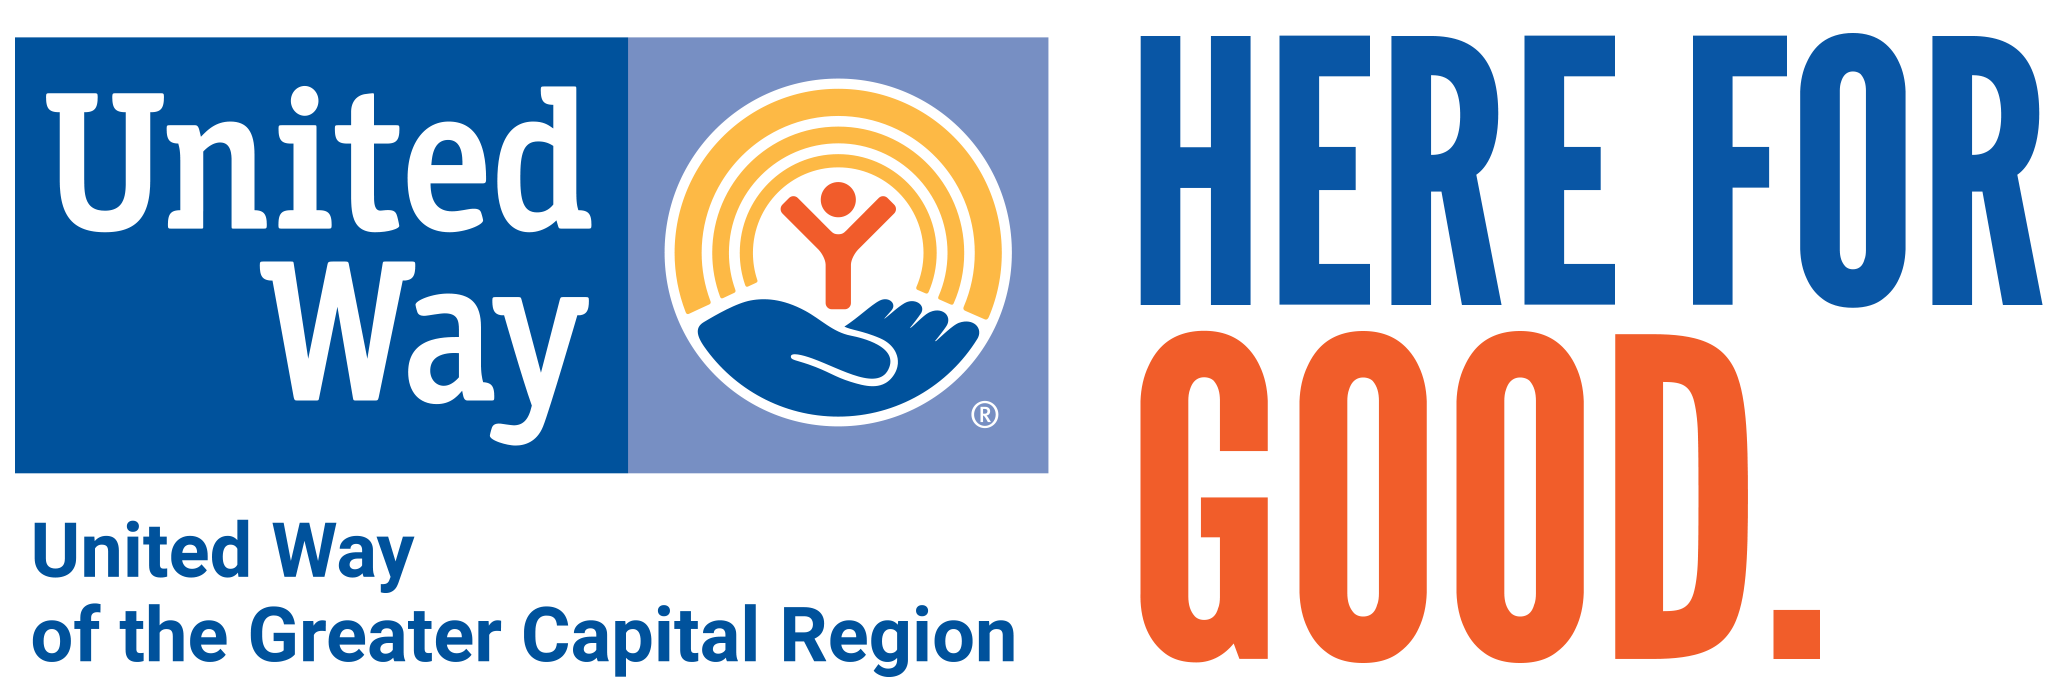 United Way Here For Good logo